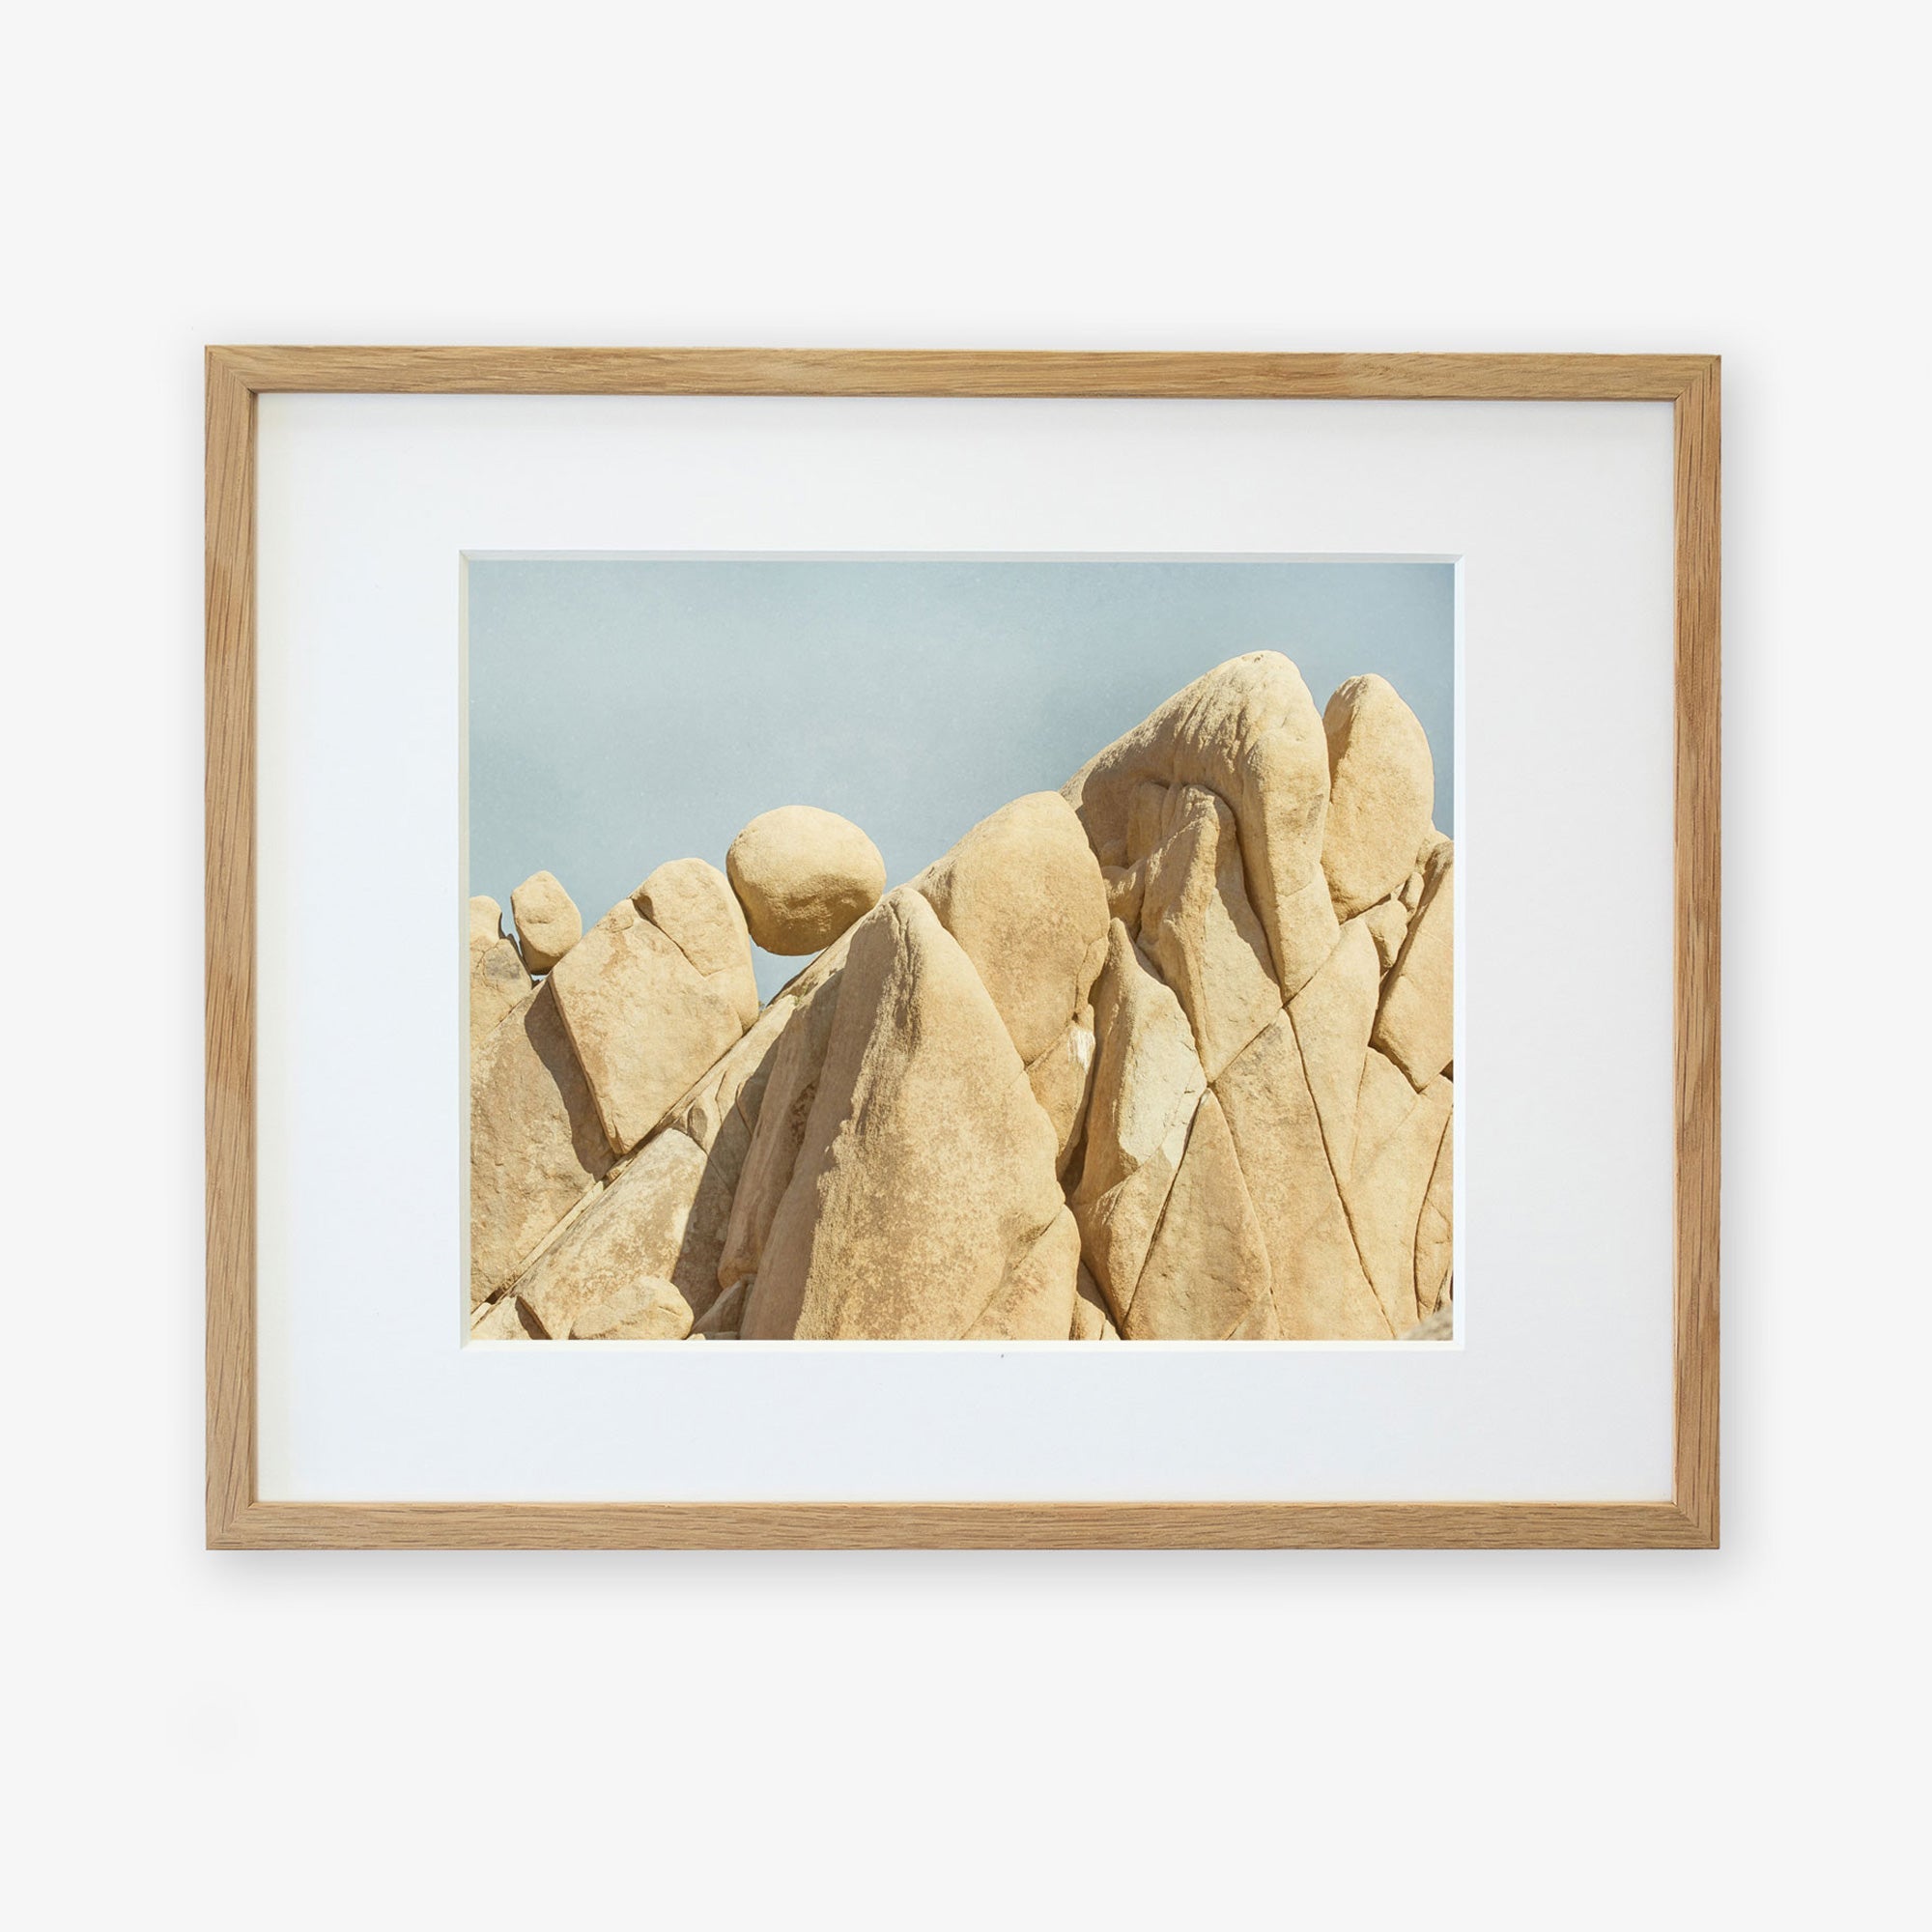 A framed Offley Green Joshua Tree Print, 'Rock Formations', displayed in a wooden frame with a white mat.